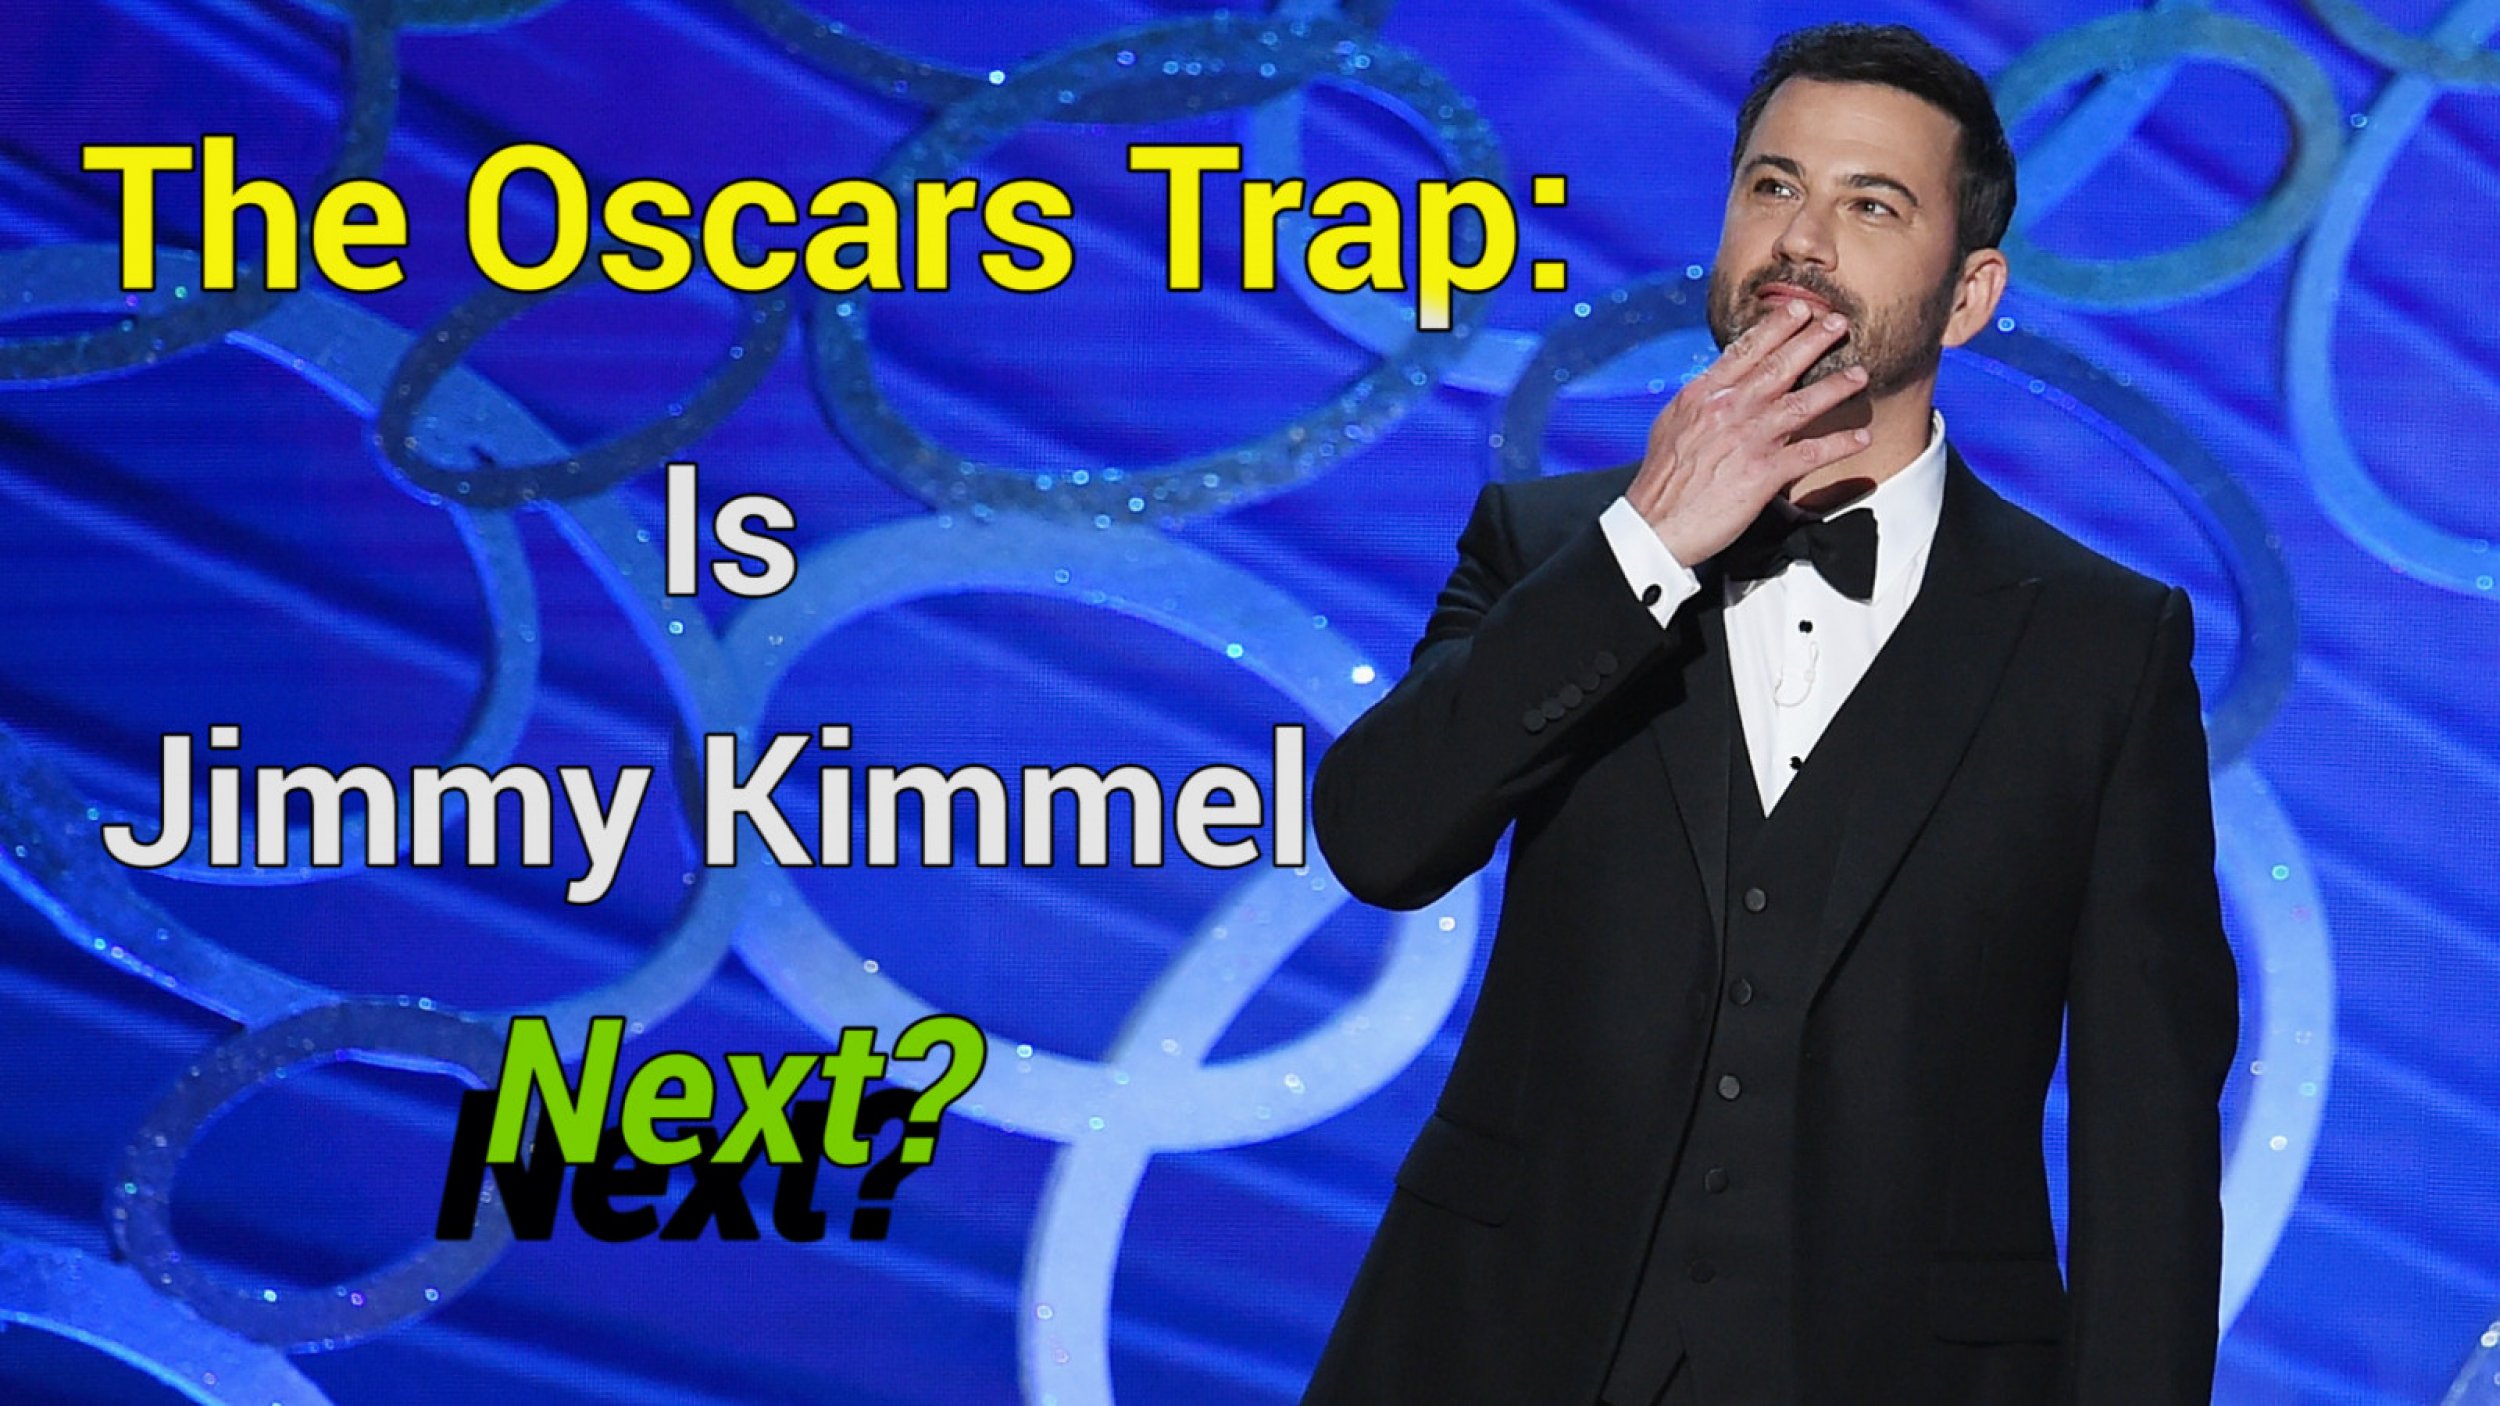 Jimmy Kimmel Making Political Jokes At The 2017 Oscars Why Hosting The Academy Awards Is So Dangerous